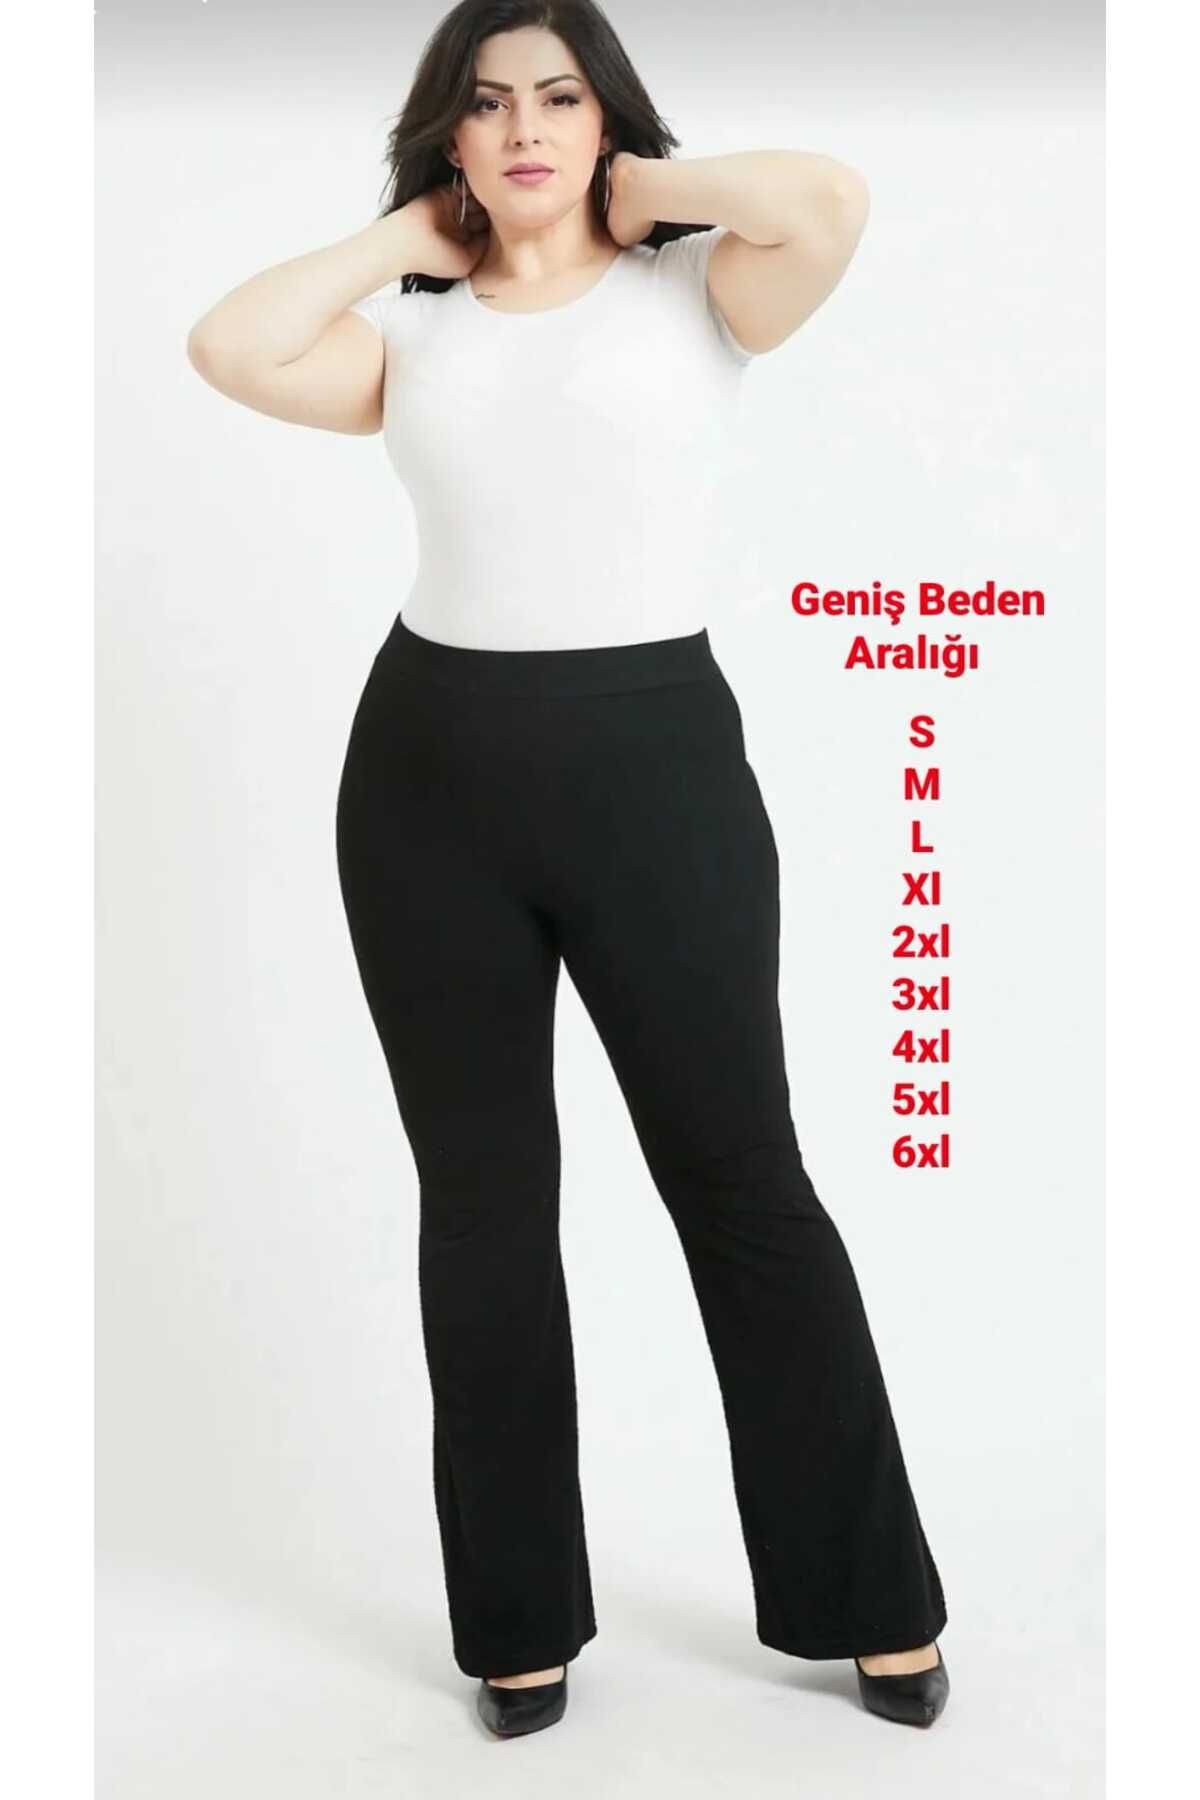 Cotton Black High Waisted Flared Trousers